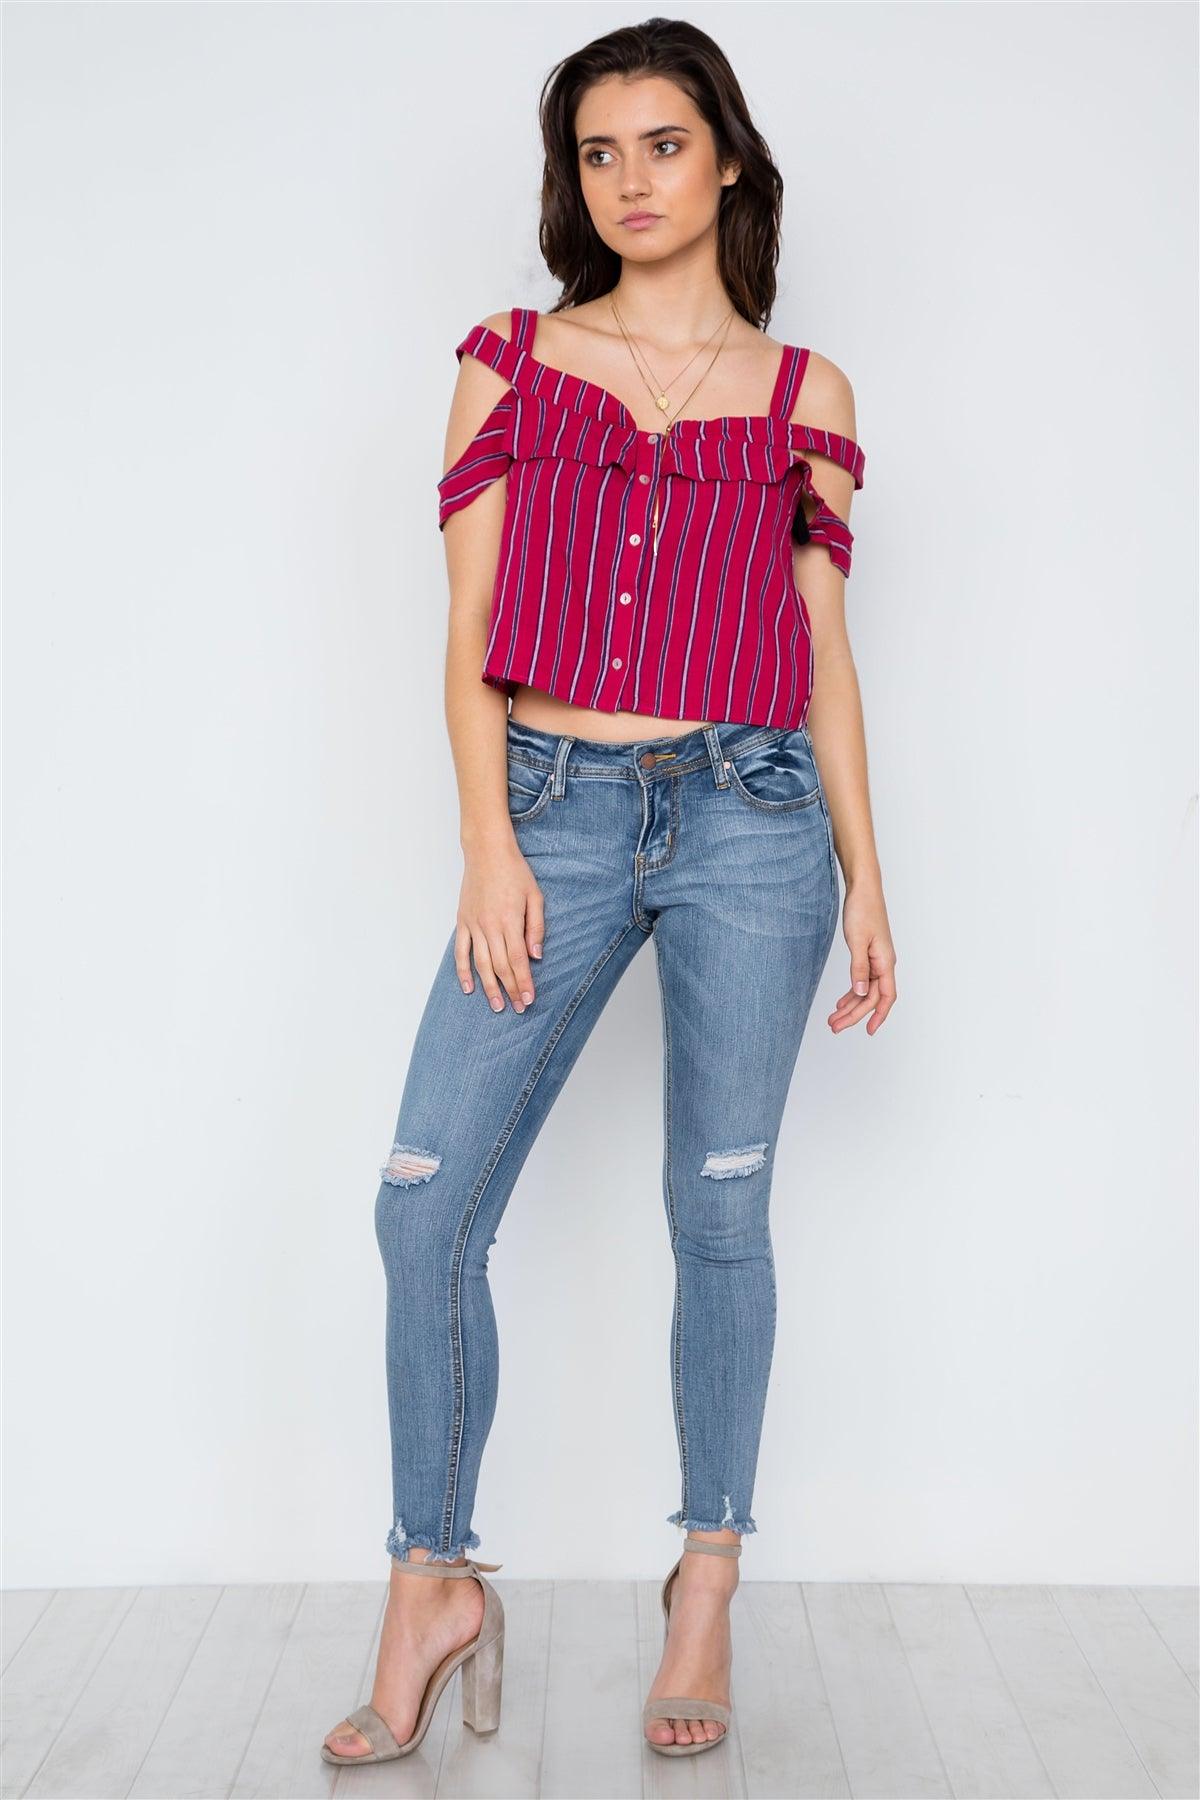 Red Striped Button Down Cut Out Flounce Boho Top / 2-2-1